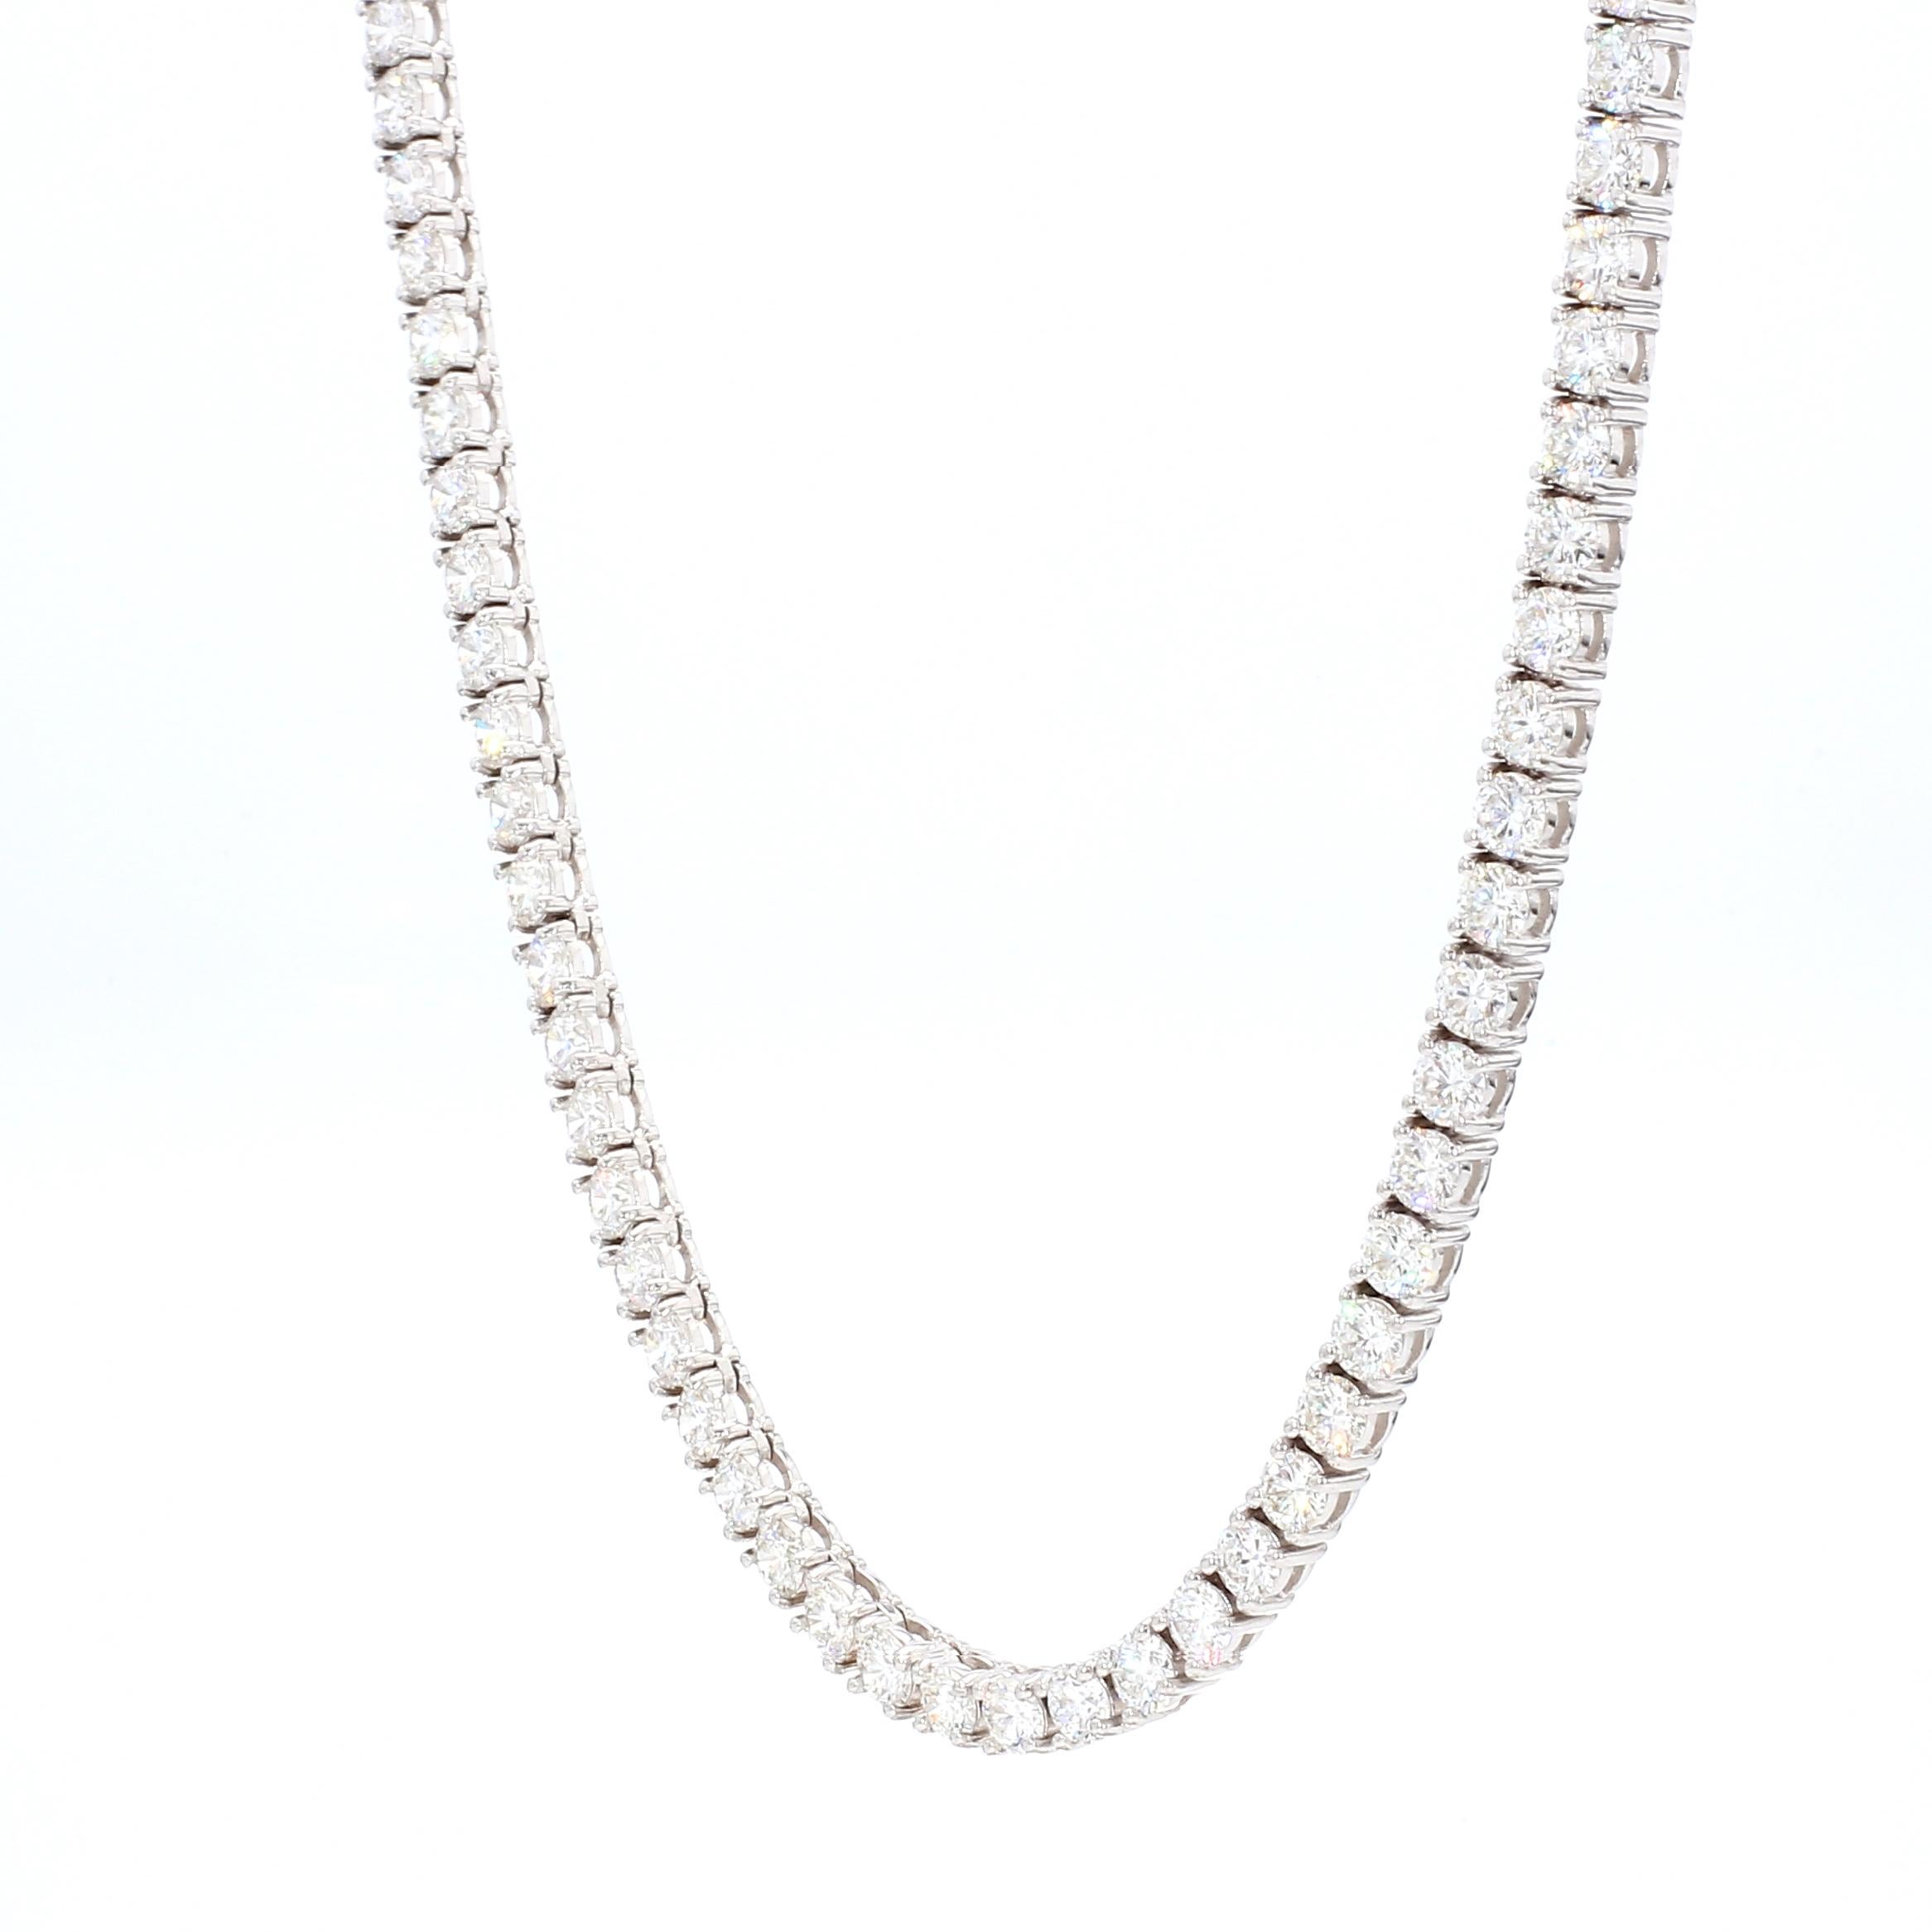 Handmade 18K White Gold Classic Tennis Necklace with 123 Round Brilliant Cut Diamonds D-E color VVS2- VS1 clarity, weighting in total 10.83 carats. 
This stunning piece is 16 inches long. 

Viewings available in our NYC wholesale office by